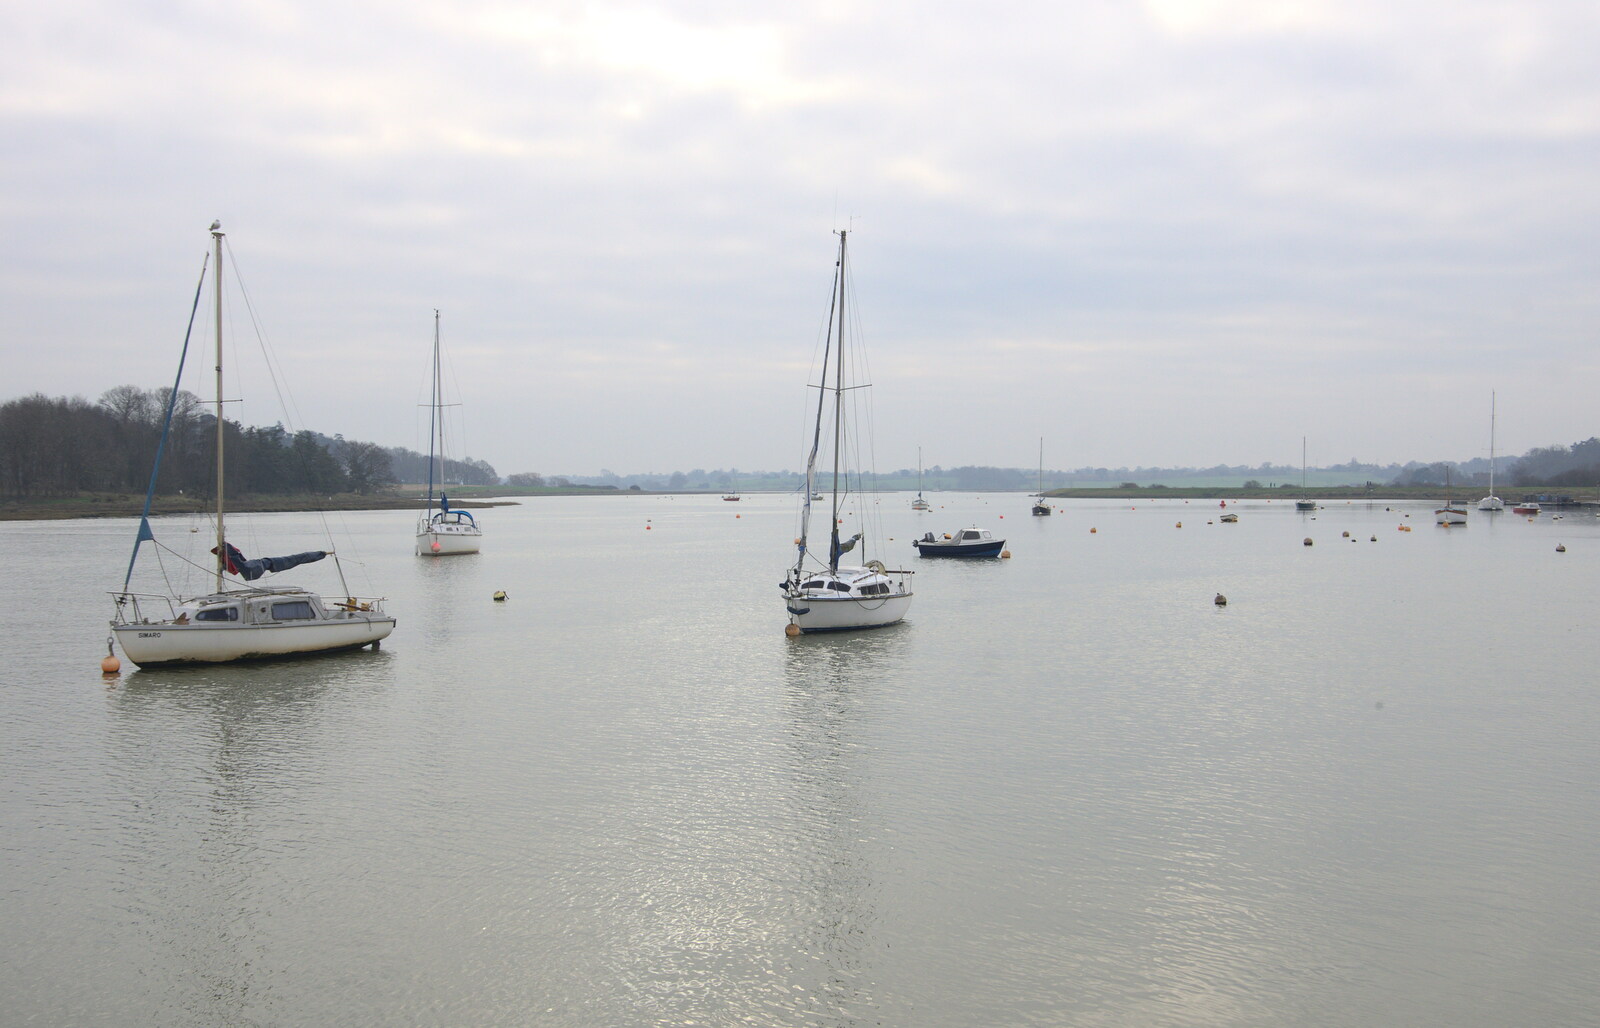 Boats on the River Deben from A Postcard From Woodbridge, Suffolk - 4th January 2019